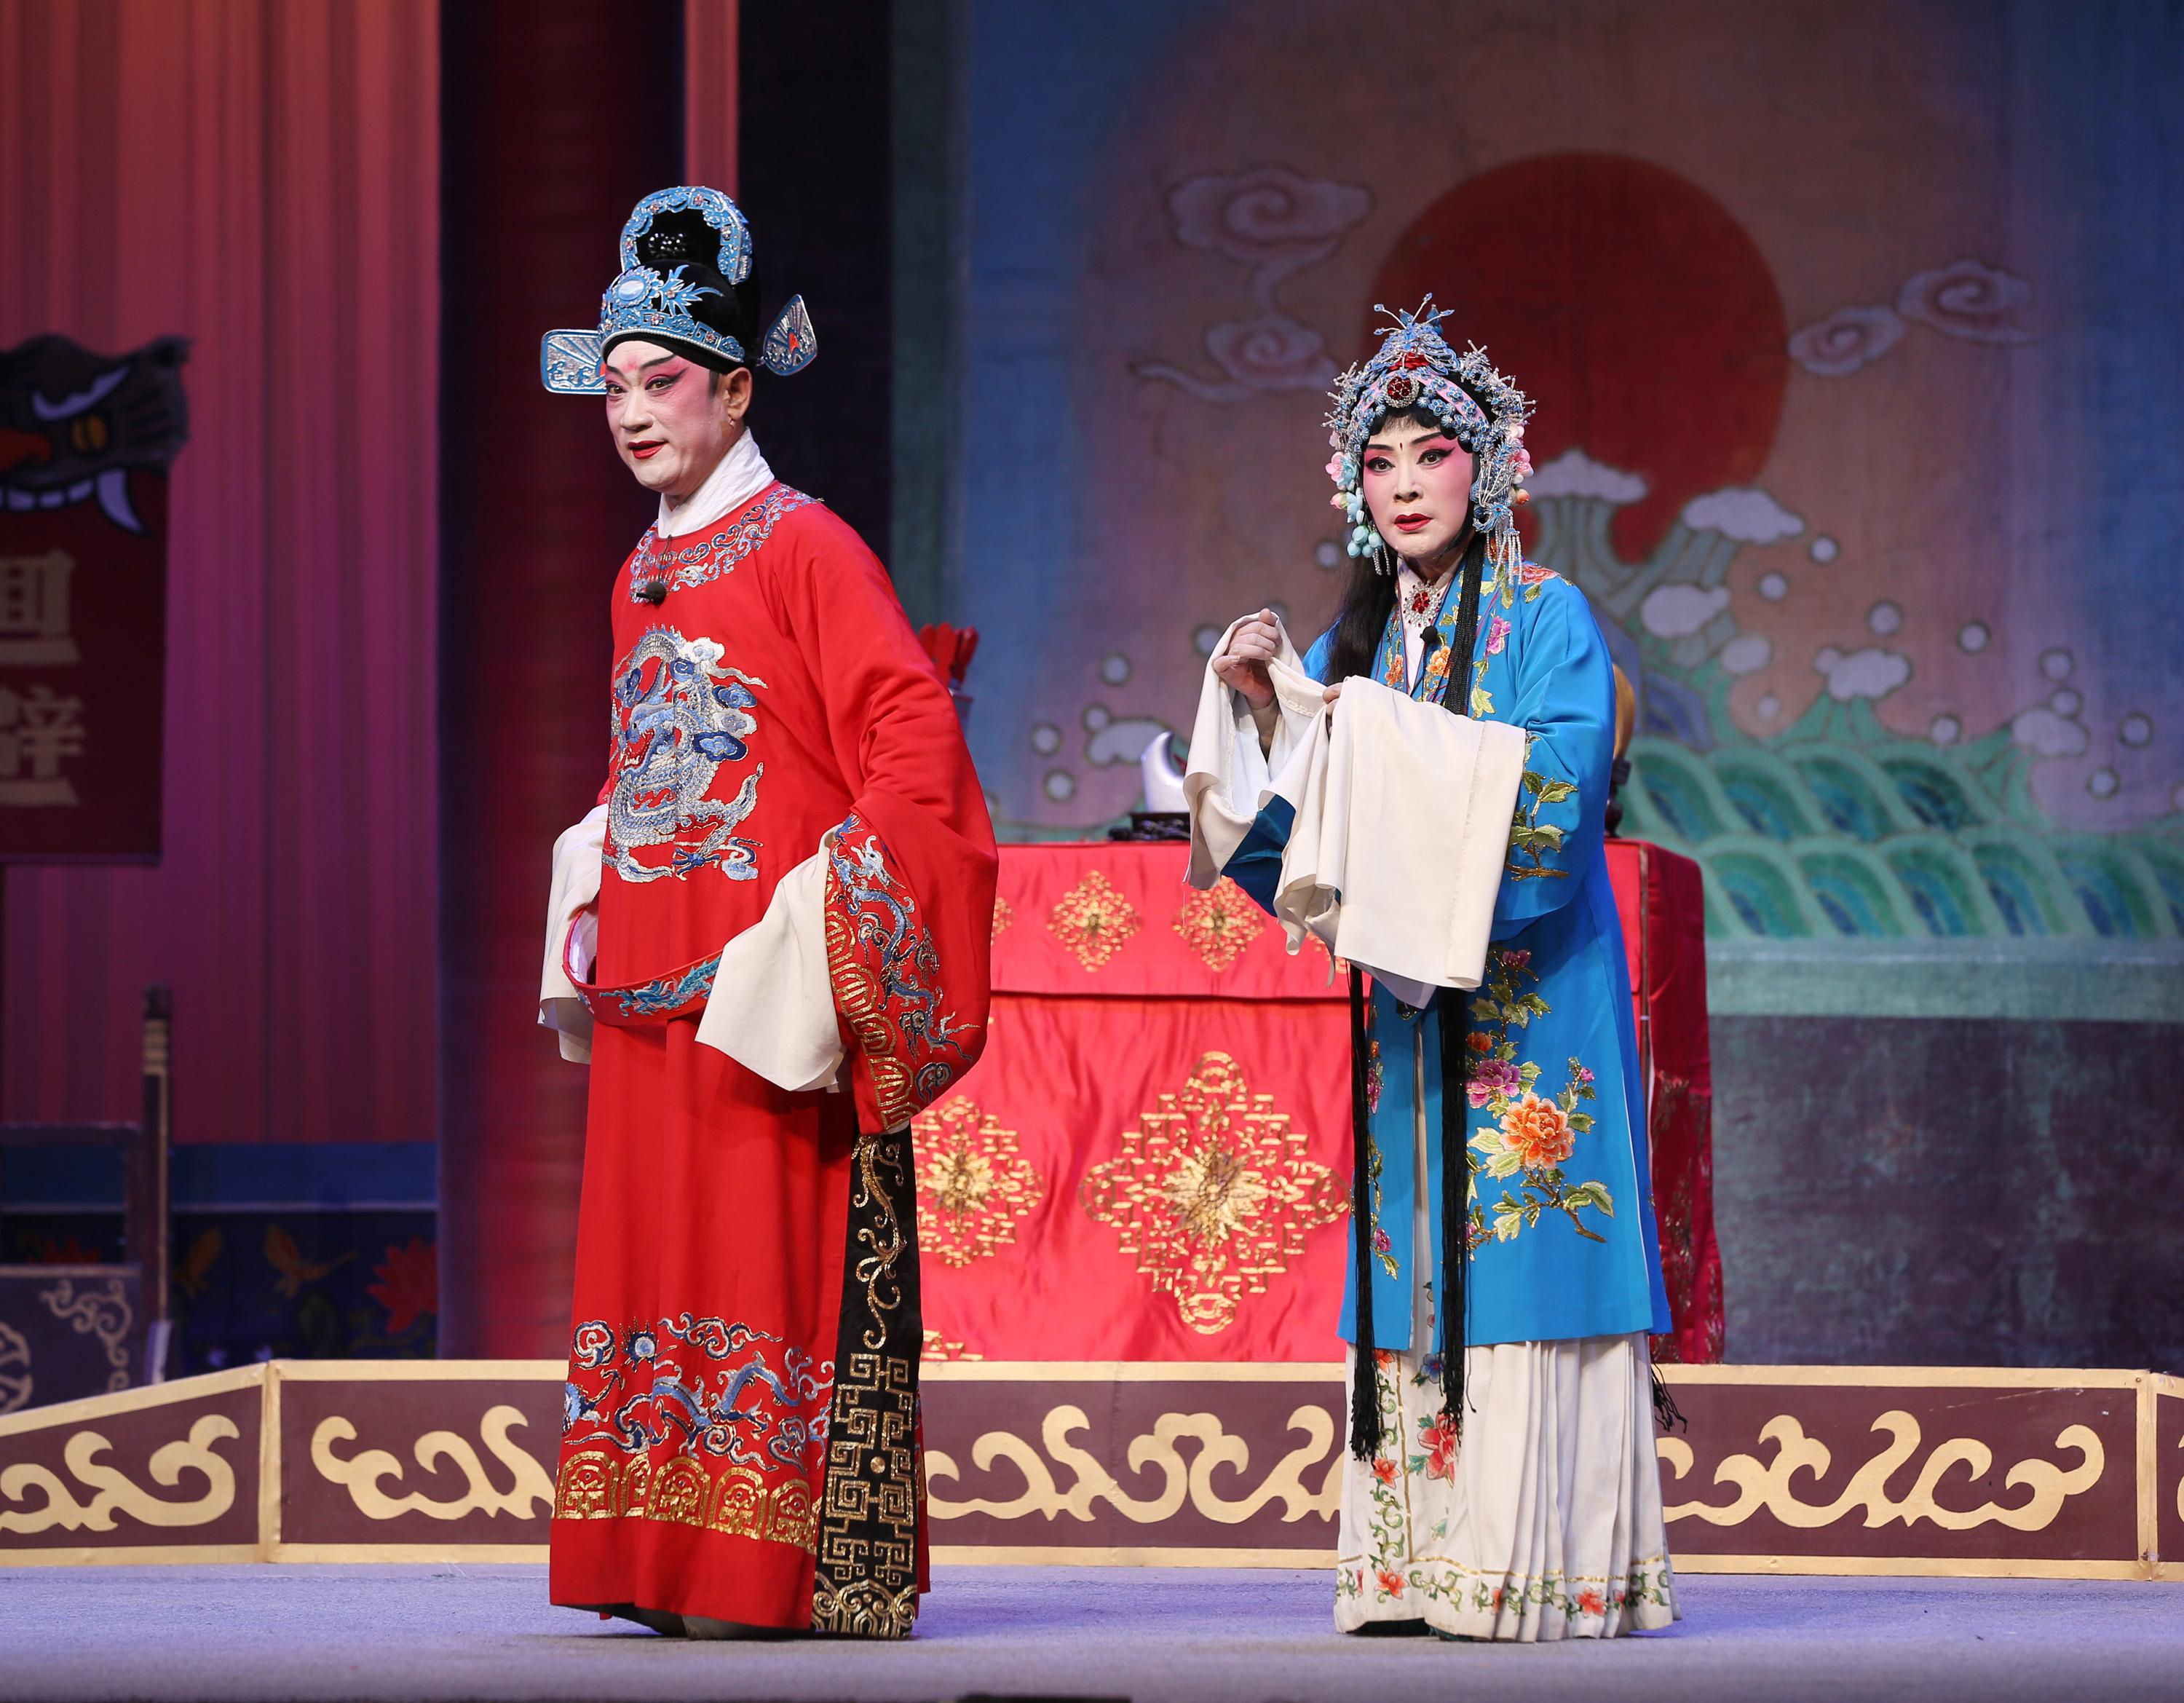 The Leisure and Cultural Services Department has invited the Centre for the Safeguarding of Qu Opera of Henan to make its debut in Hong Kong in June for three performances of iconic plays at this year's Chinese Opera Festival. Photo shows a scene of "Chen Sanliang".